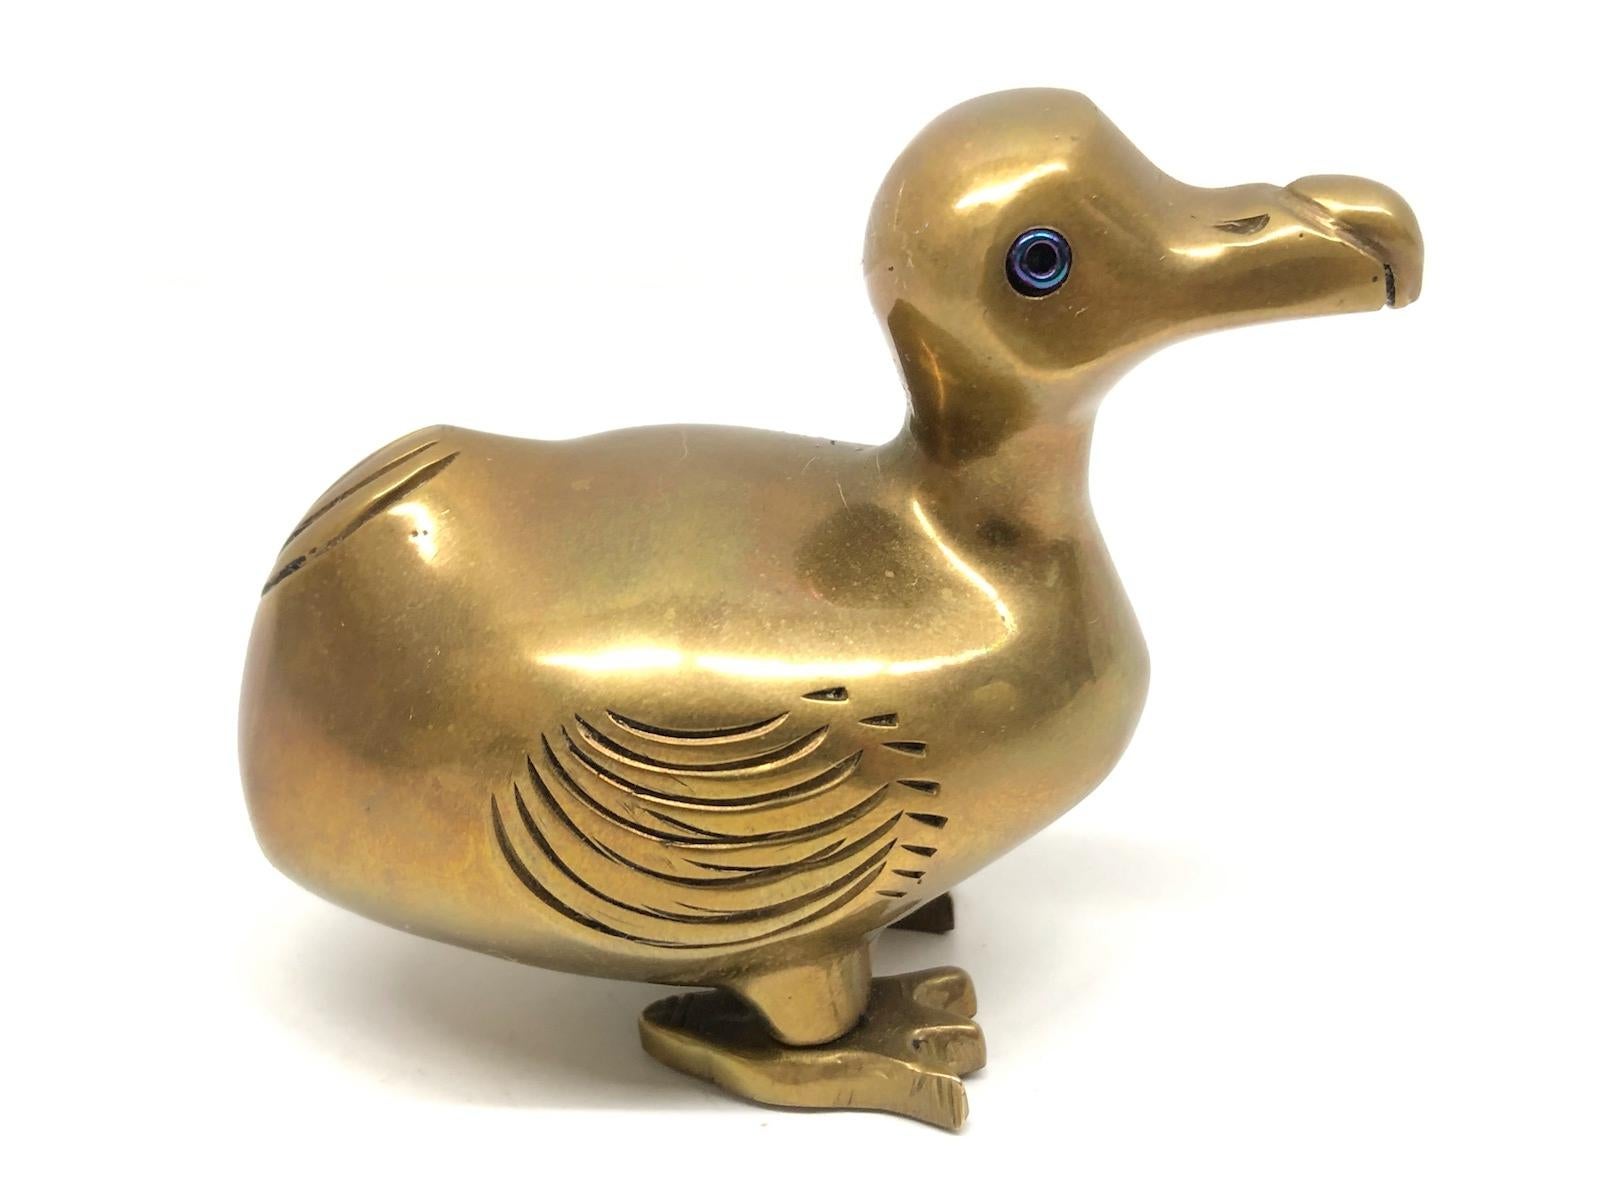 A lovely mysterious dodo bird figurine, flightless and extinct, this sturdy little guy is loaded with character. Made in the 1960s. Found at an estate sale in Nuremberg, Germany. It is not marked. A nice addition to your collection. It is in very